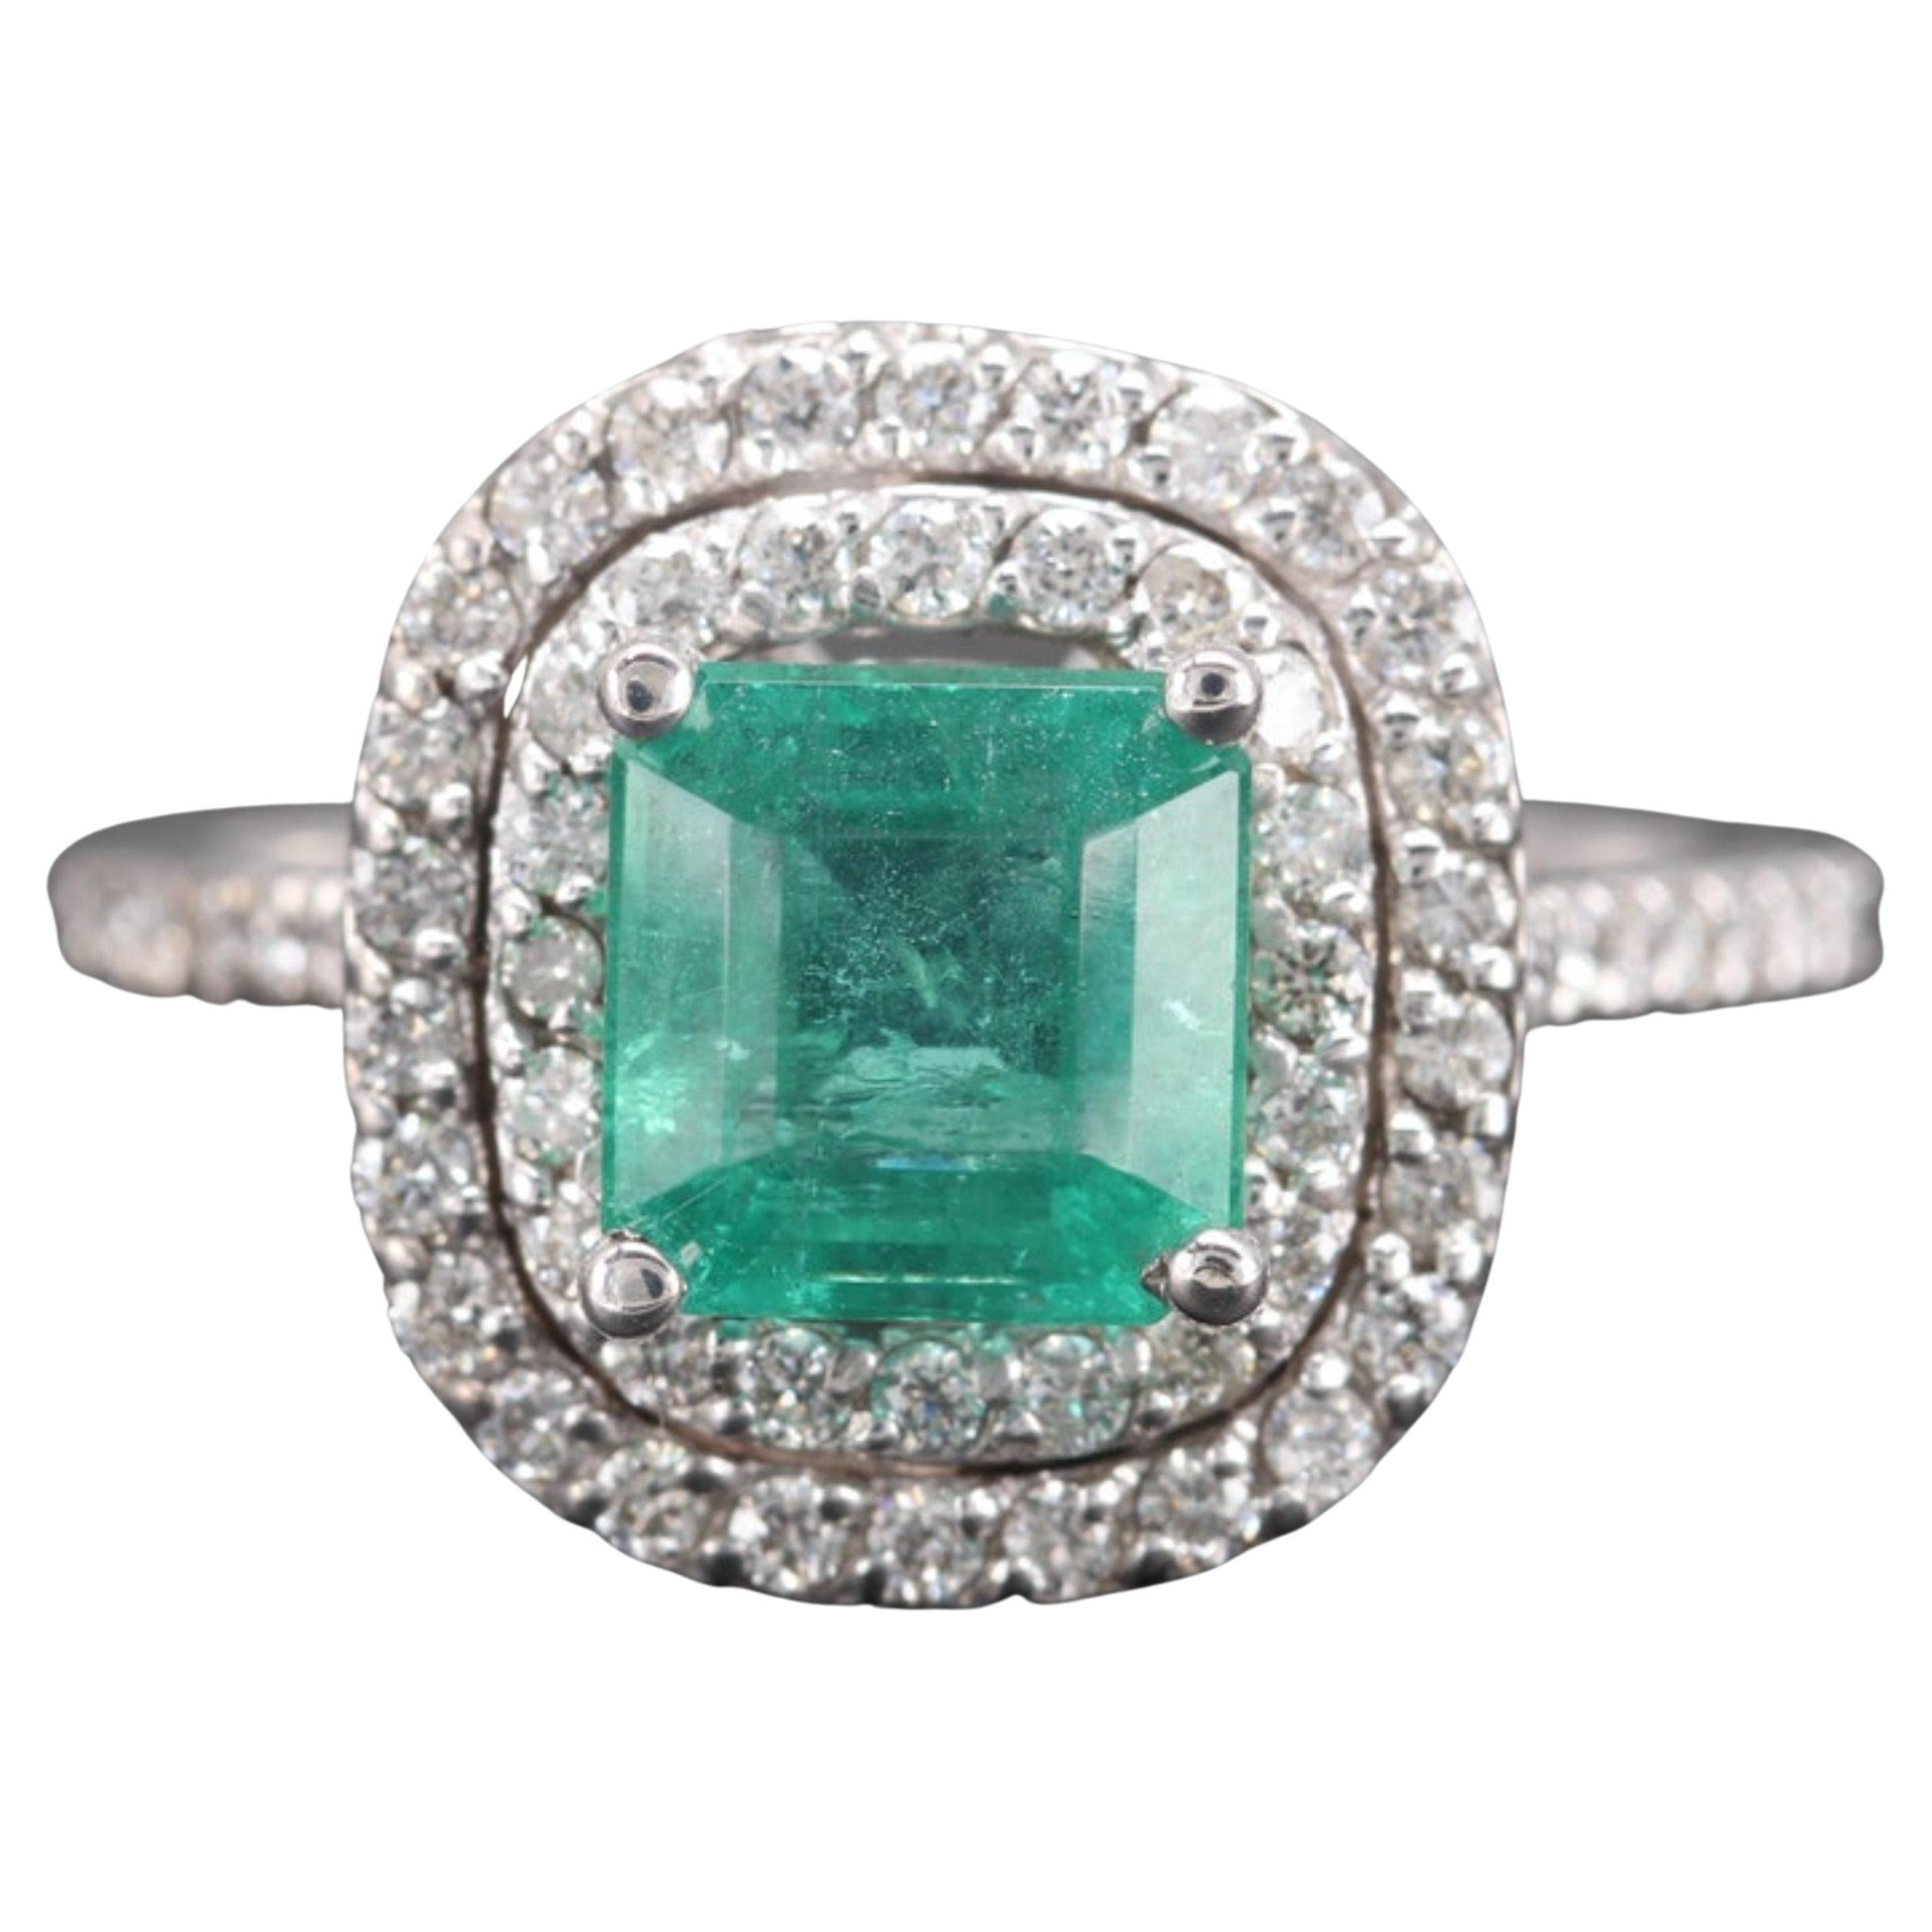 For Sale:  Art Deco Natural Emerald Diamond Engagement Ring Set in 18K Gold, Cocktail Ring